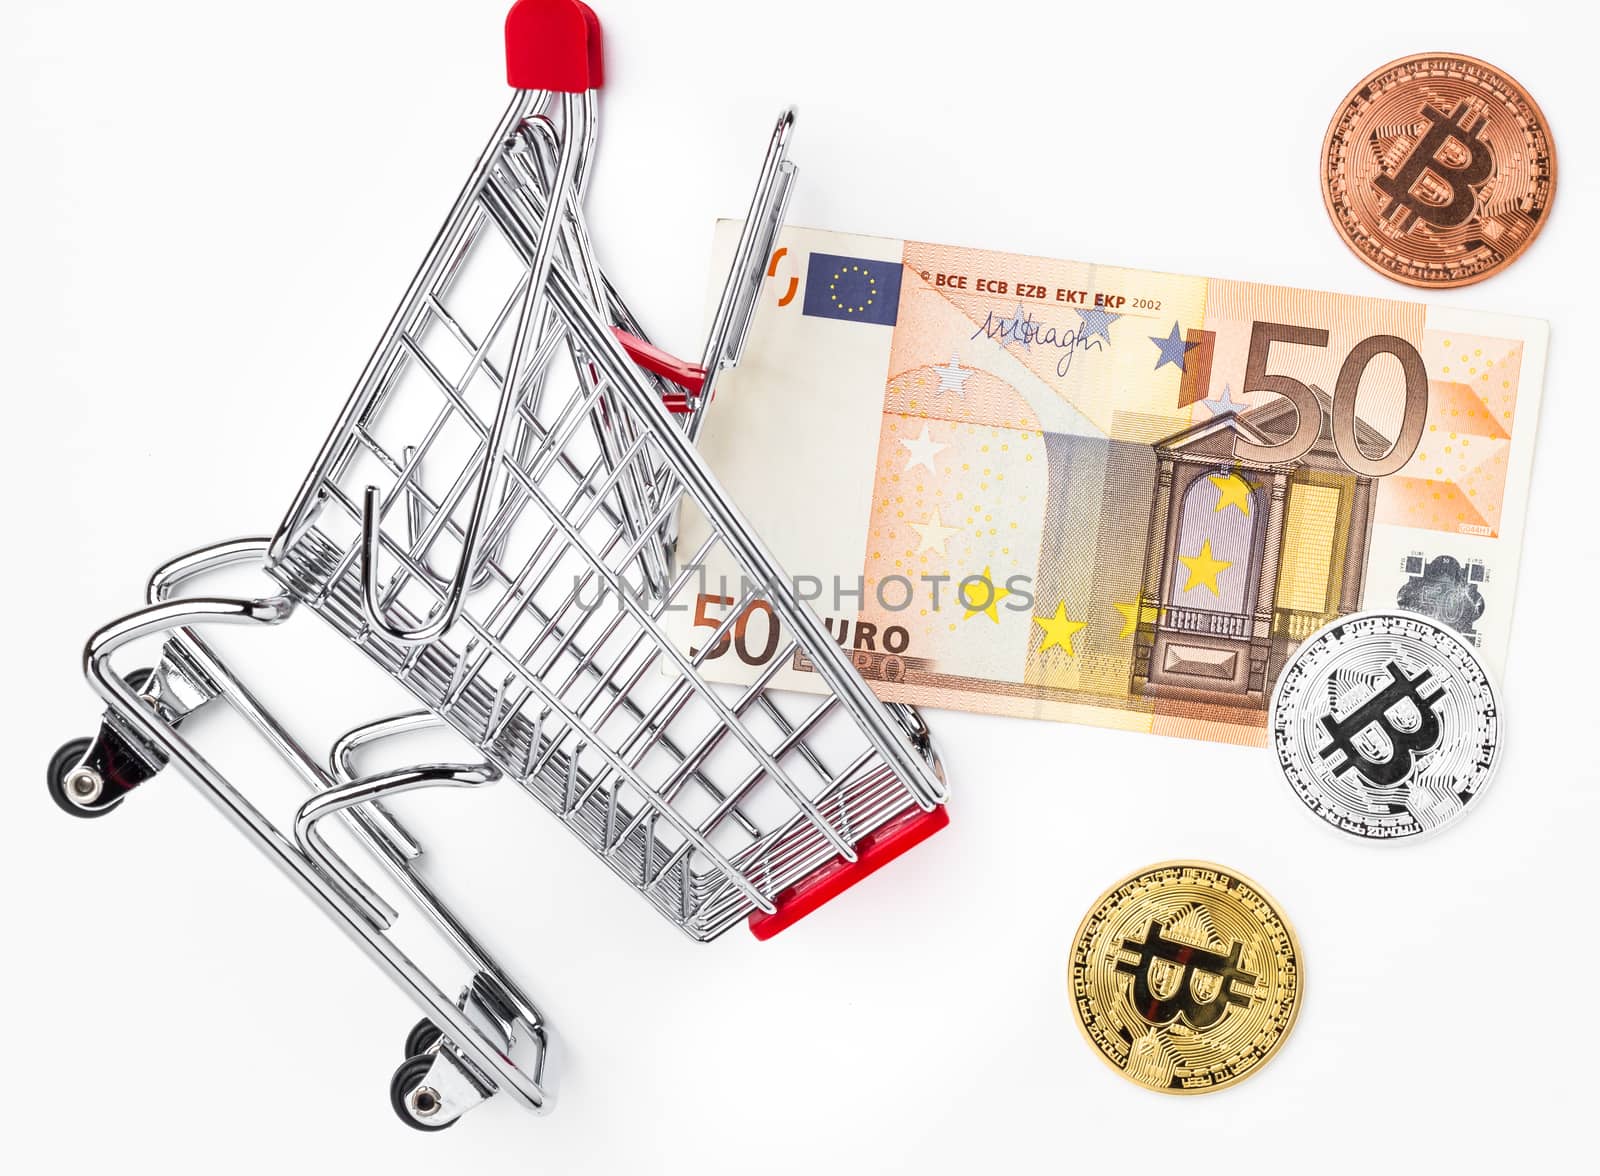 50 Euro and physical metal bitcoins ( gold, silver, bronze) in fallen toy trolley. Business concept, wrong investment, crisis. Traditional money versus cryptocurrency concept.